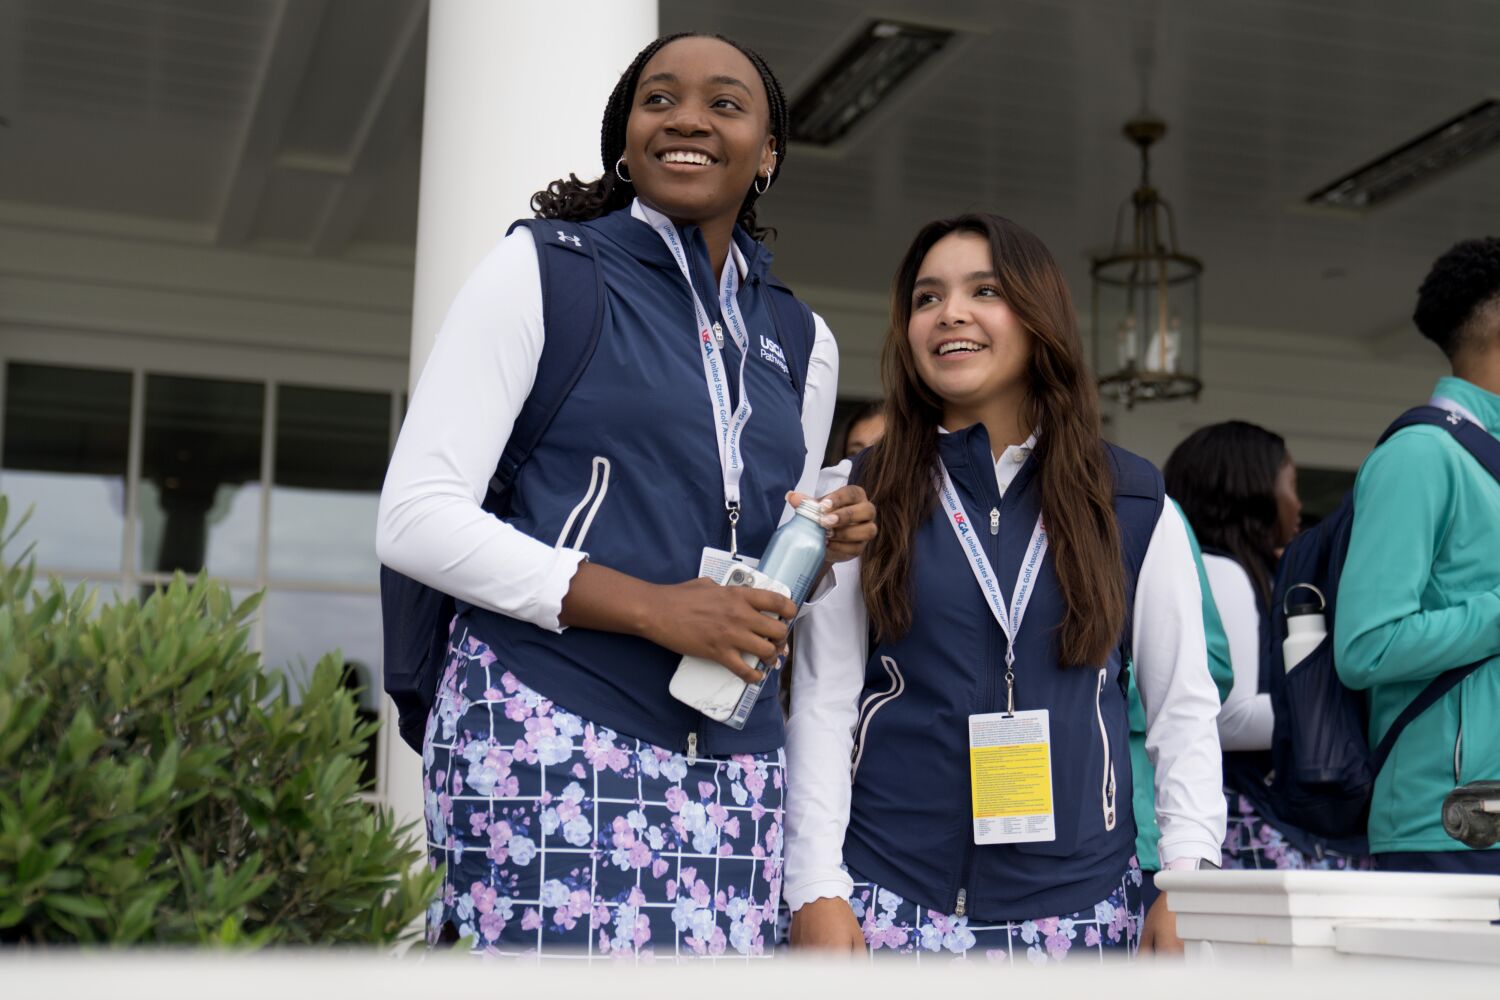 U.S. Open offers Pathways diverse interns a glimpse of the future